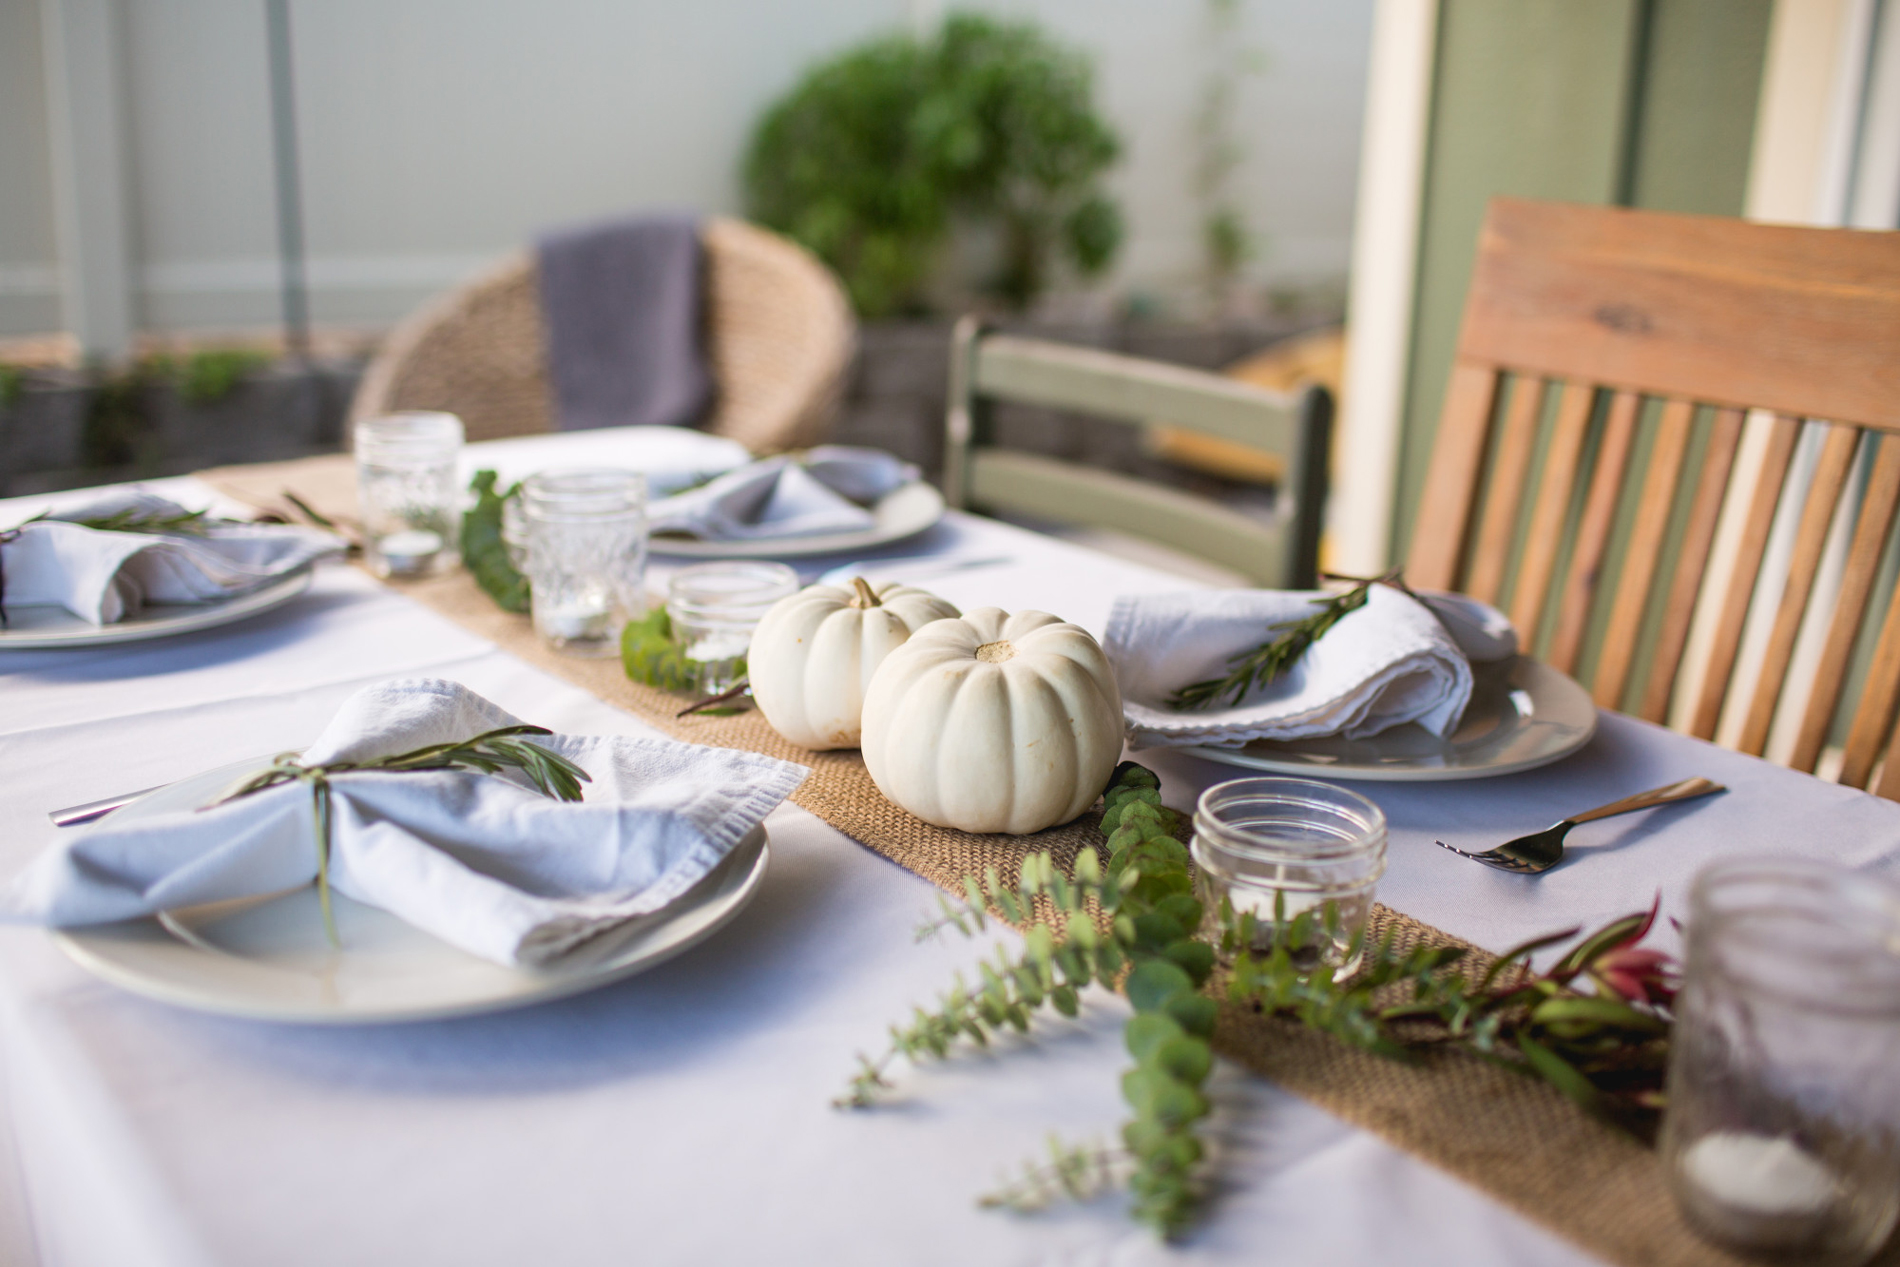 Five Tips for a Stress-Free, Healthy Thanksgiving